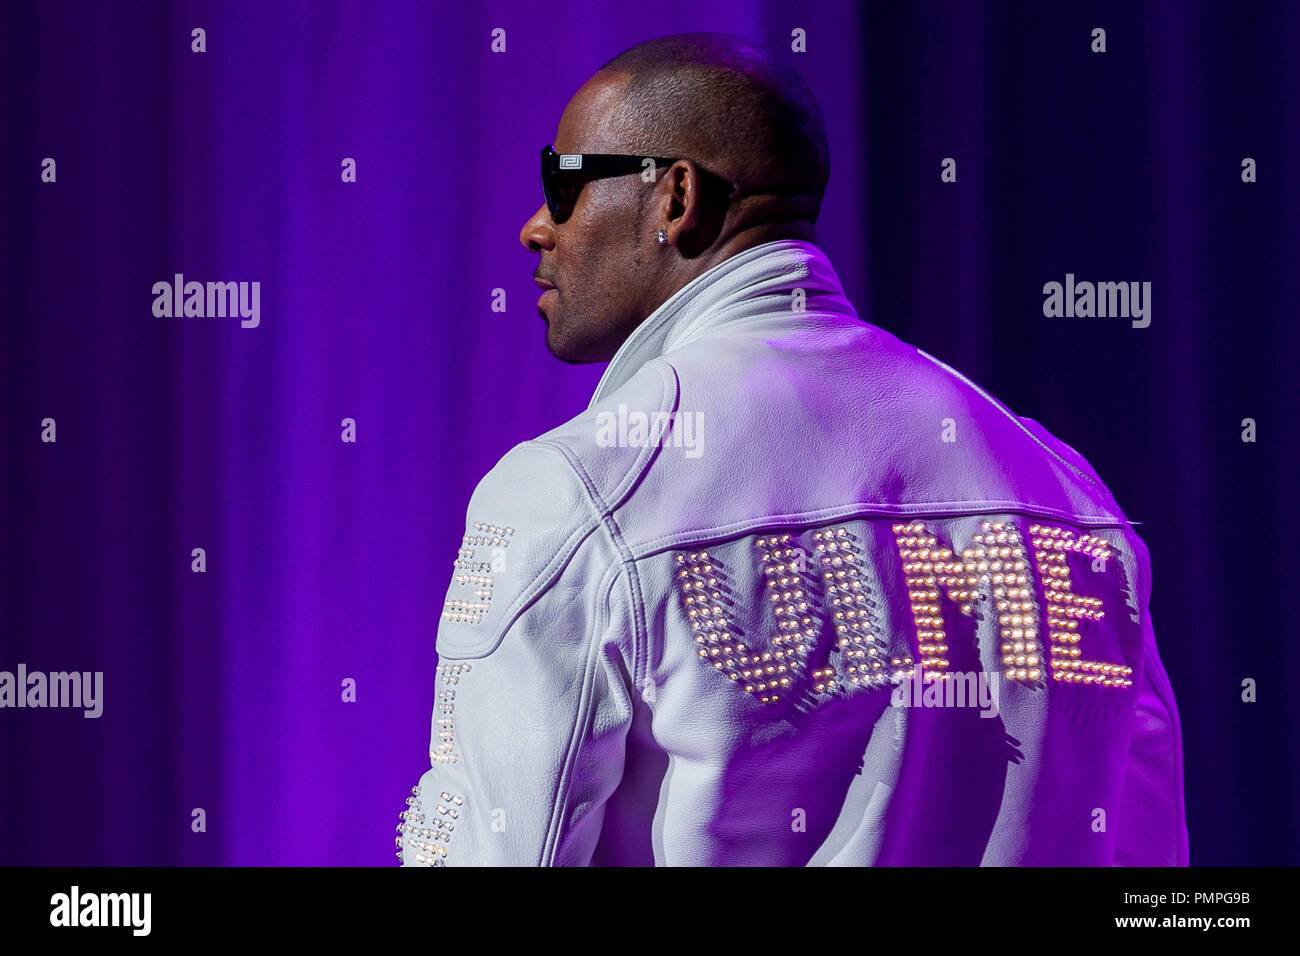 R Kelly performs during his 'Single Ladies' tour at Nokia Theatre L.A. LIVE on November 2, 2012 in Los Angeles. CA. Photo by Eden Ari / PRPP / PictureLux  File Reference # 31687 011PRPPEA  For Editorial Use Only -  All Rights Reserved Stock Photo